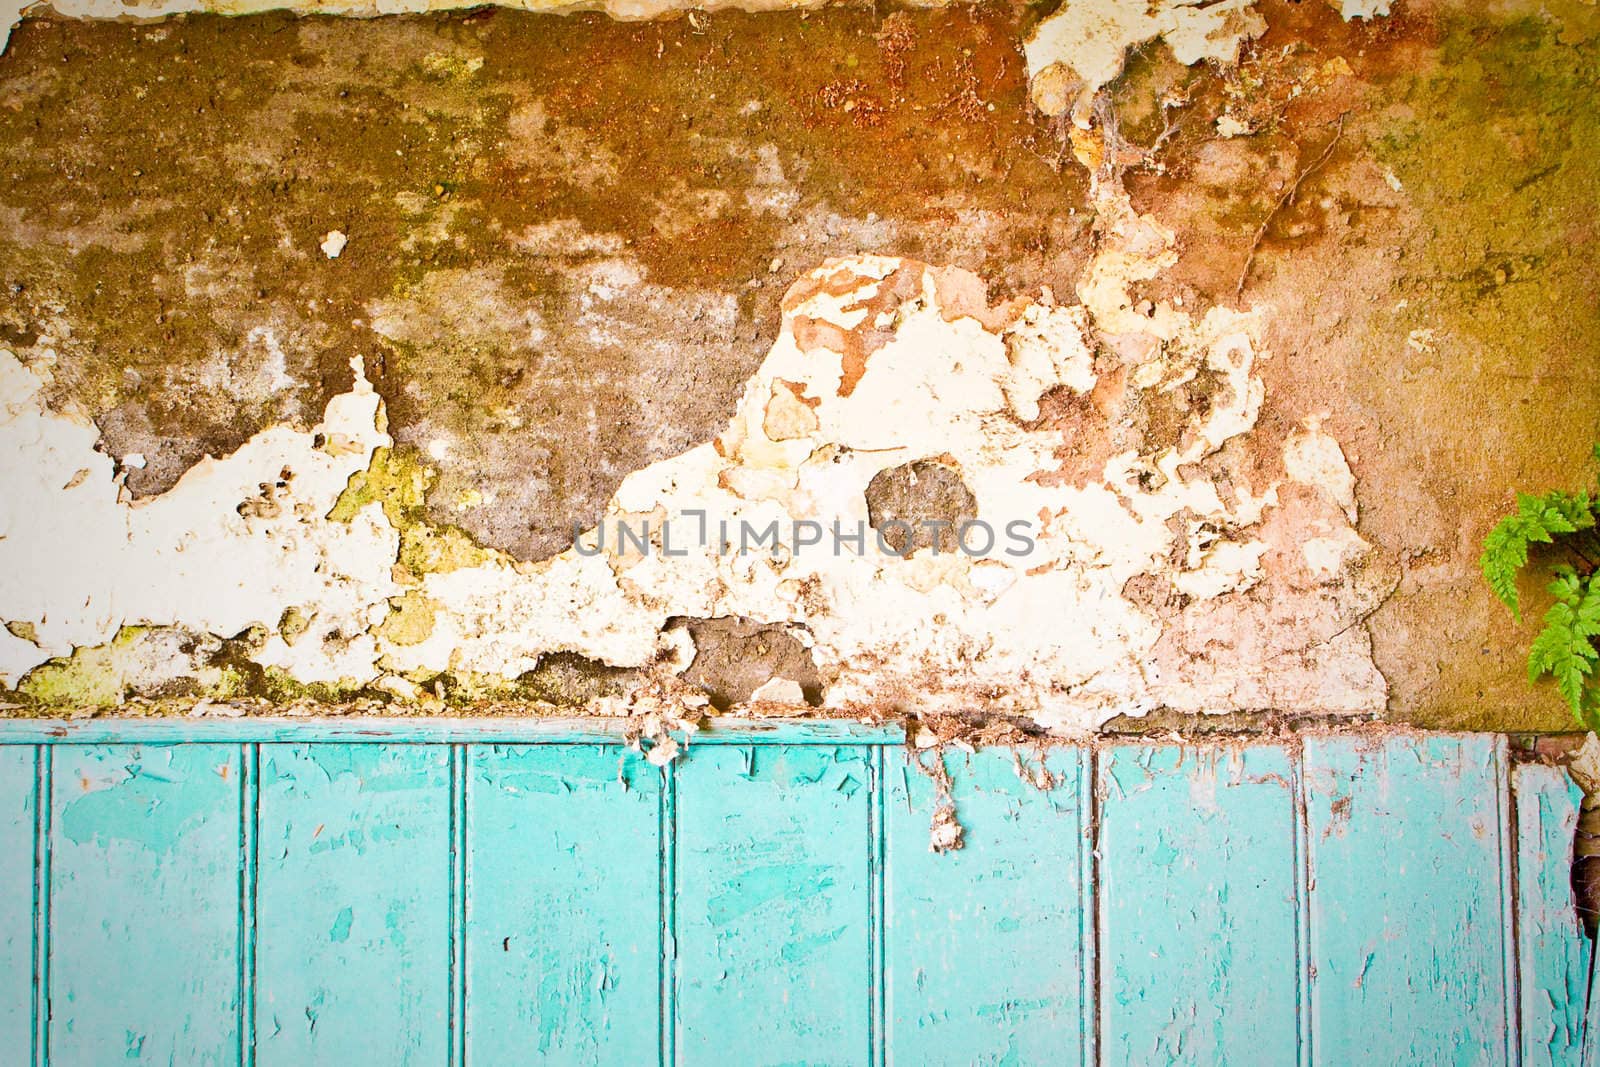 An interesting textured background image of a decaying wall and blue wooden panels